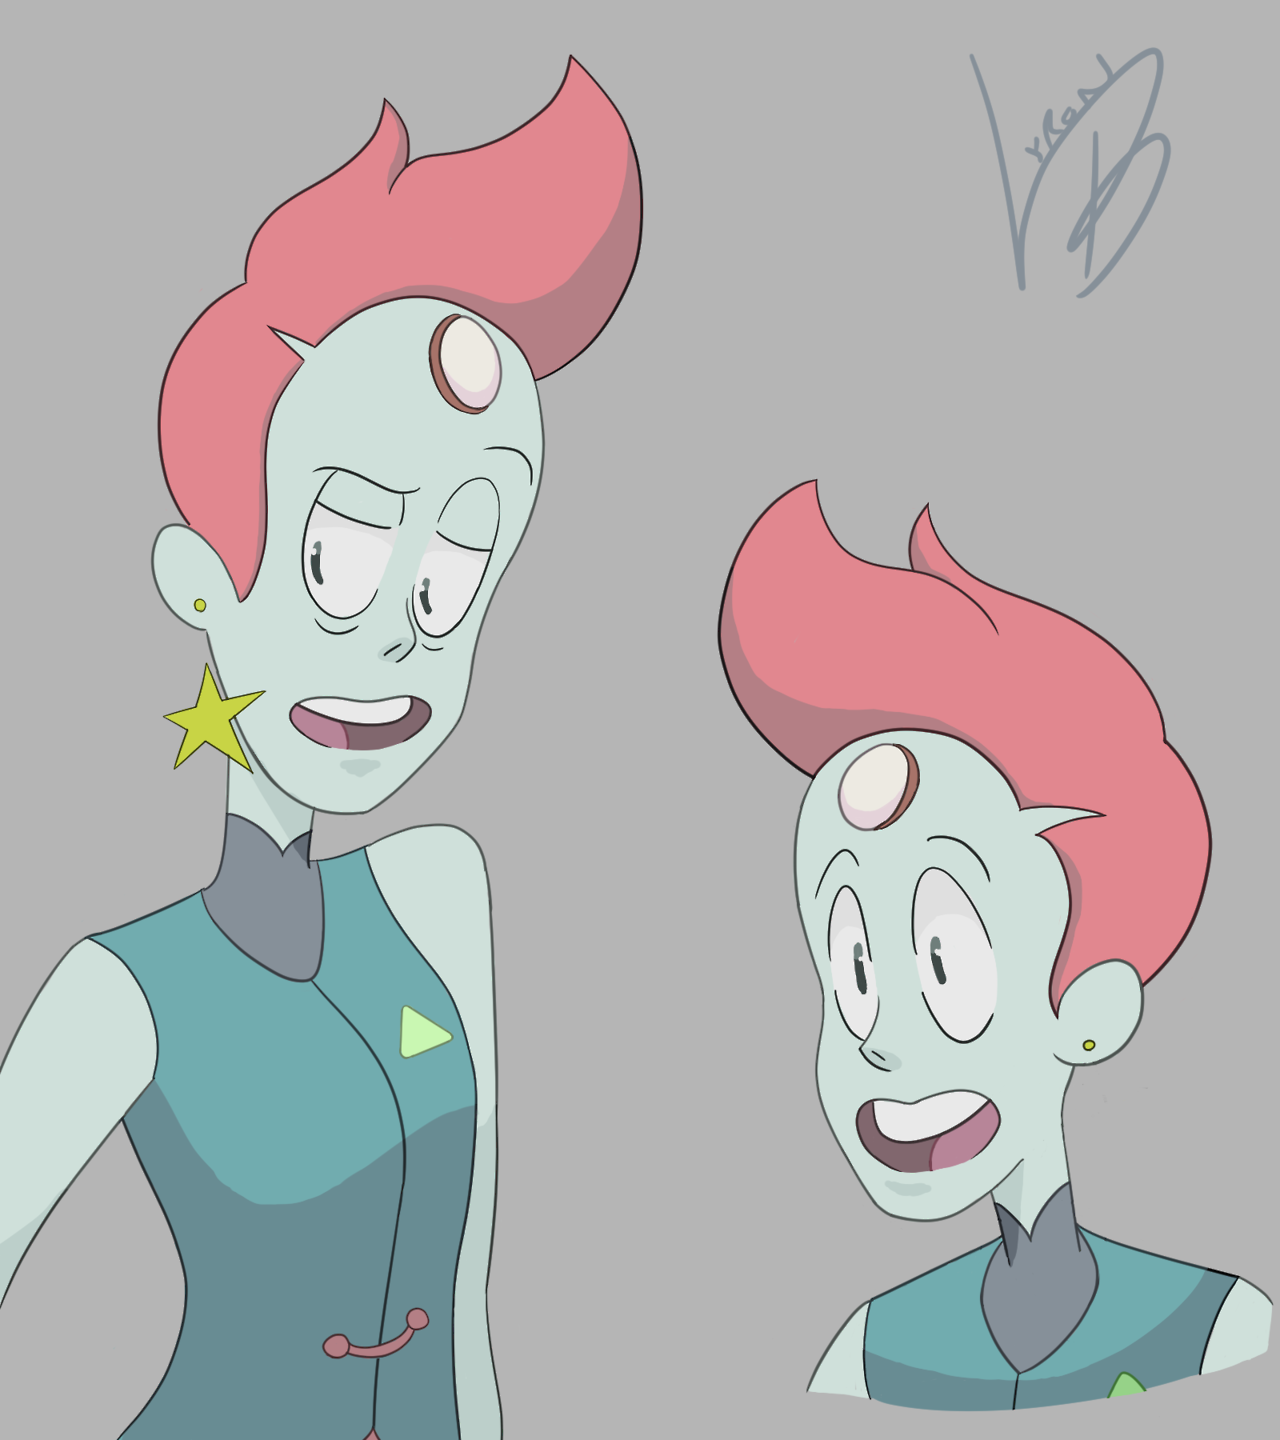 Here’s Pearl from the Pilot of Steven Universe. I actually really liked her design before they changed it so I had to draw this eventually.